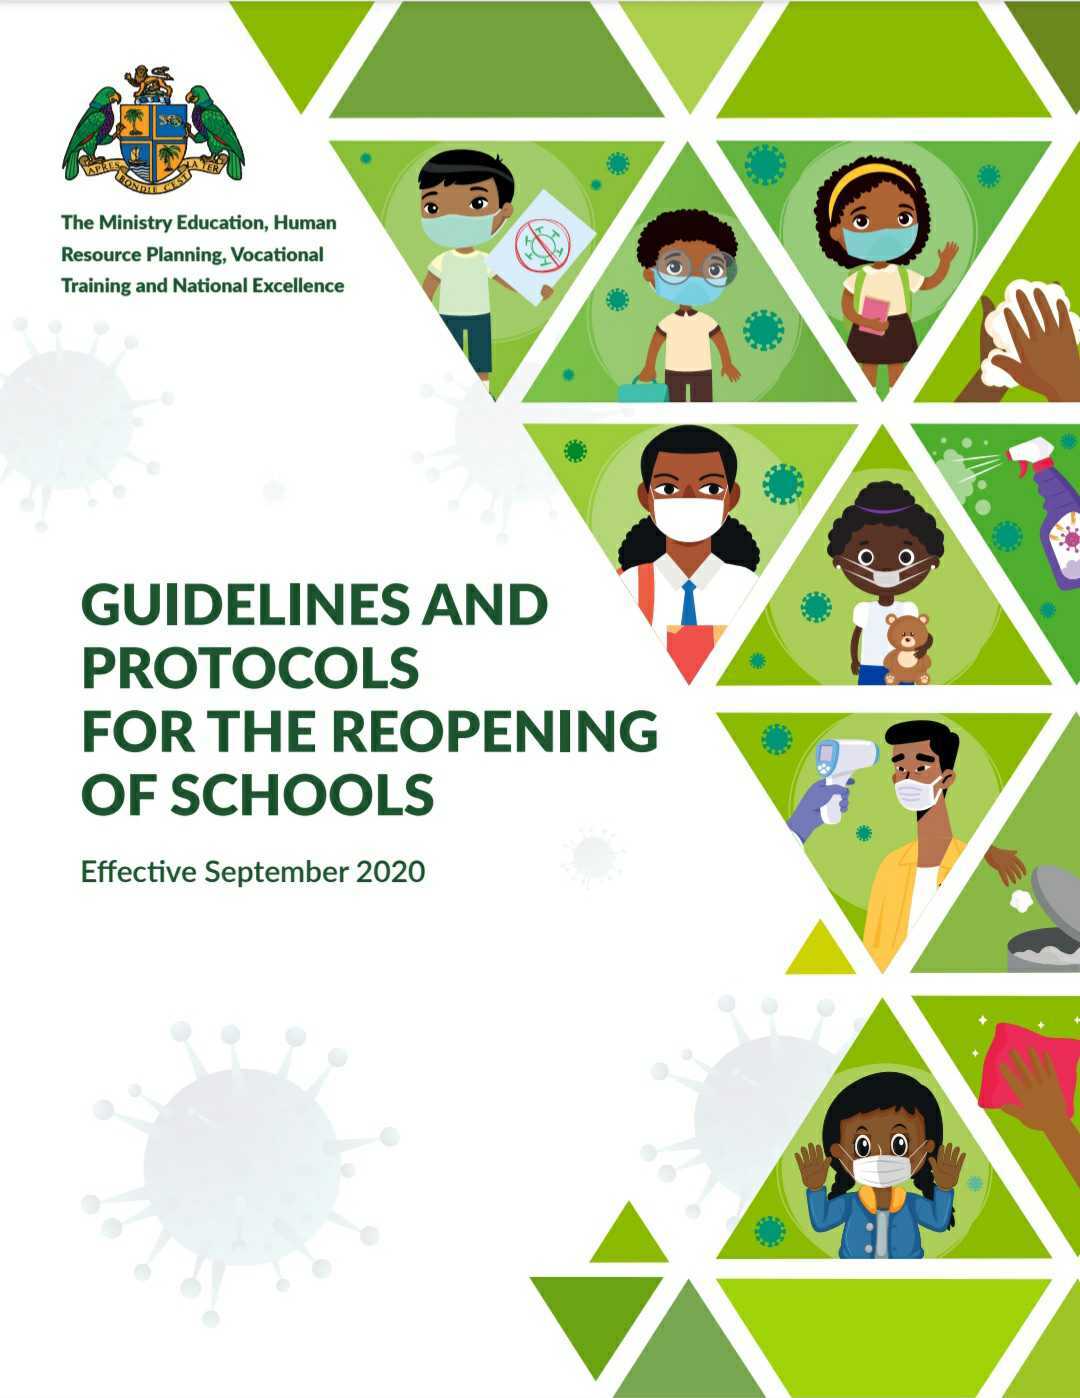 Guidelines and Protocols for the reopening of schools by the Ministry of Education